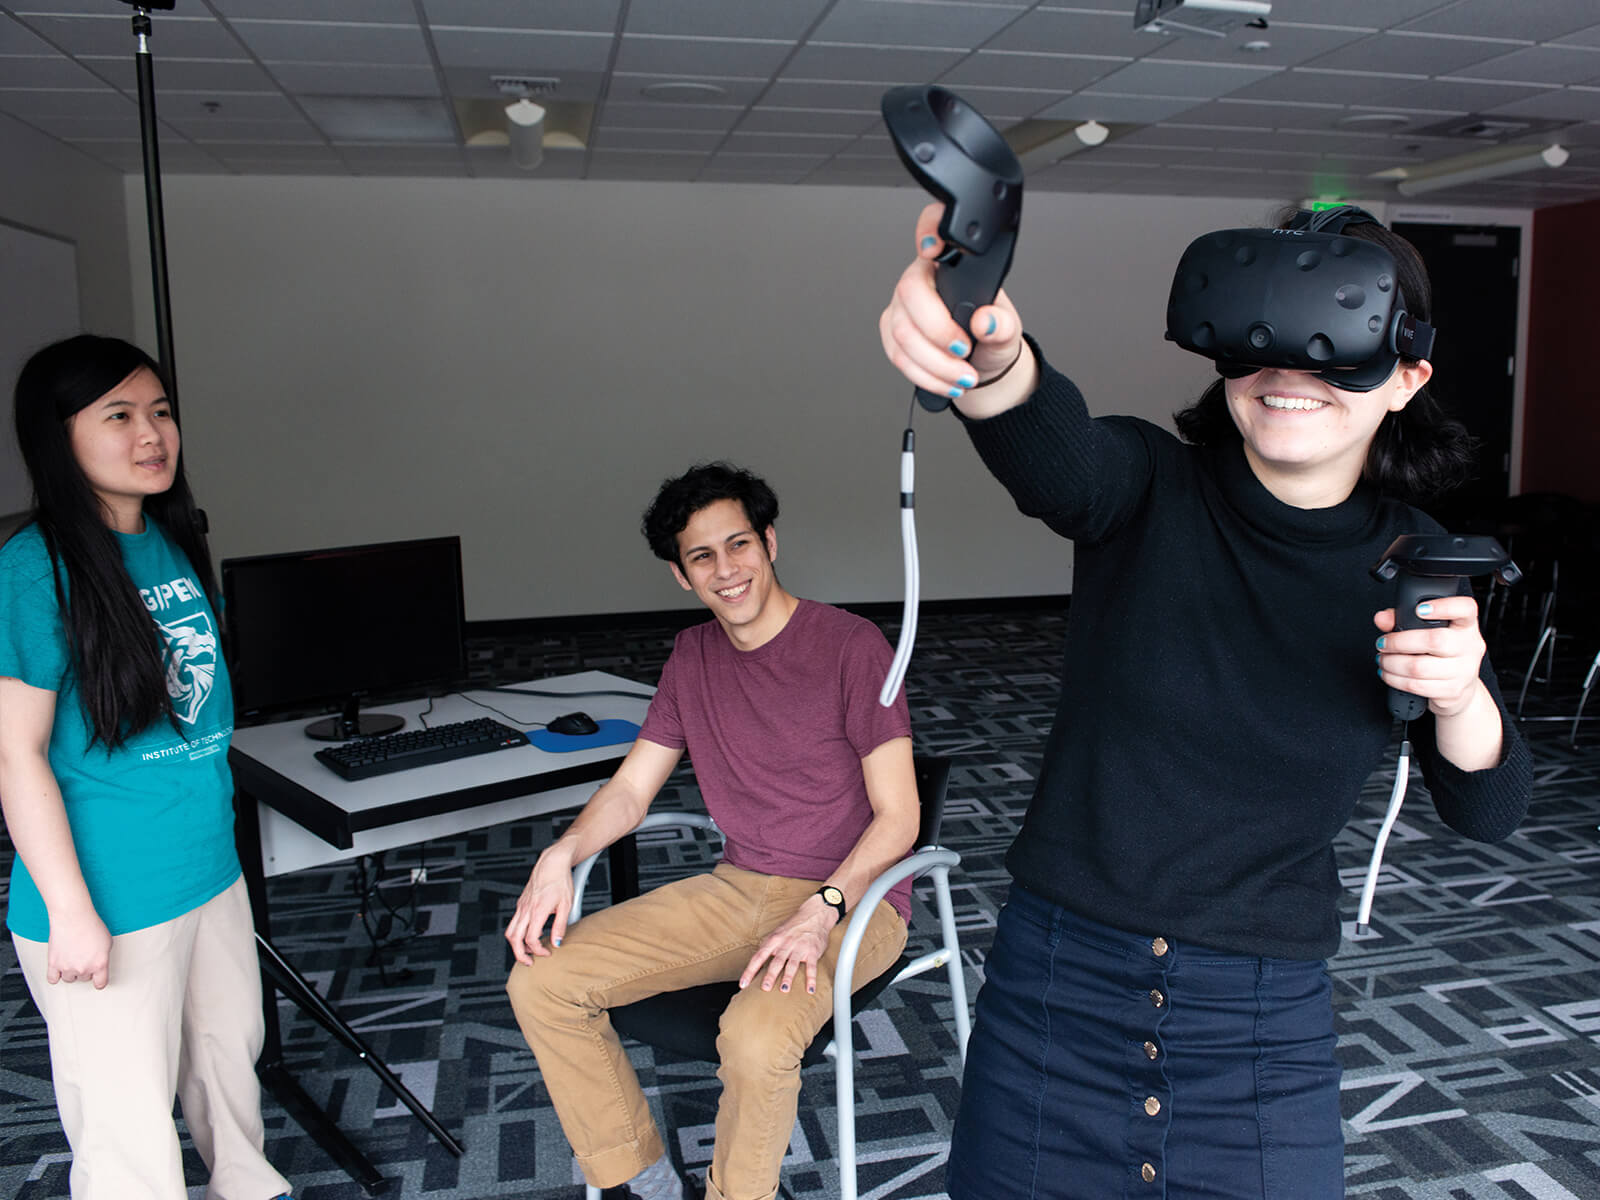 A DigiPen student tries out their VR game team project as their teammates smile at them.